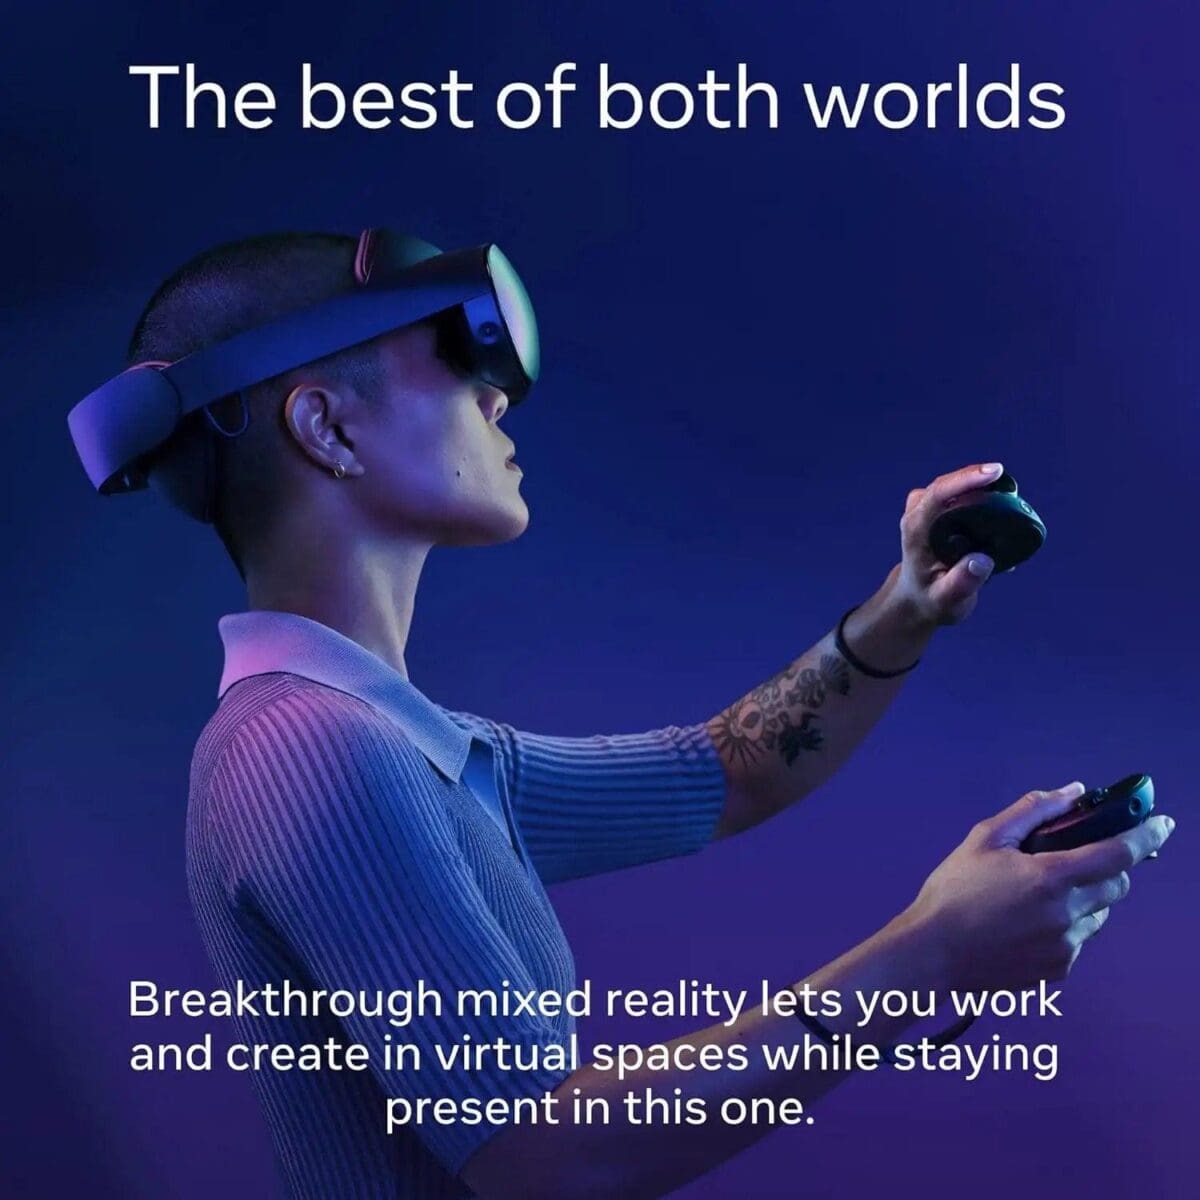 Oculus Meta Quest Pro 256GB (Mixed Reality Headset)